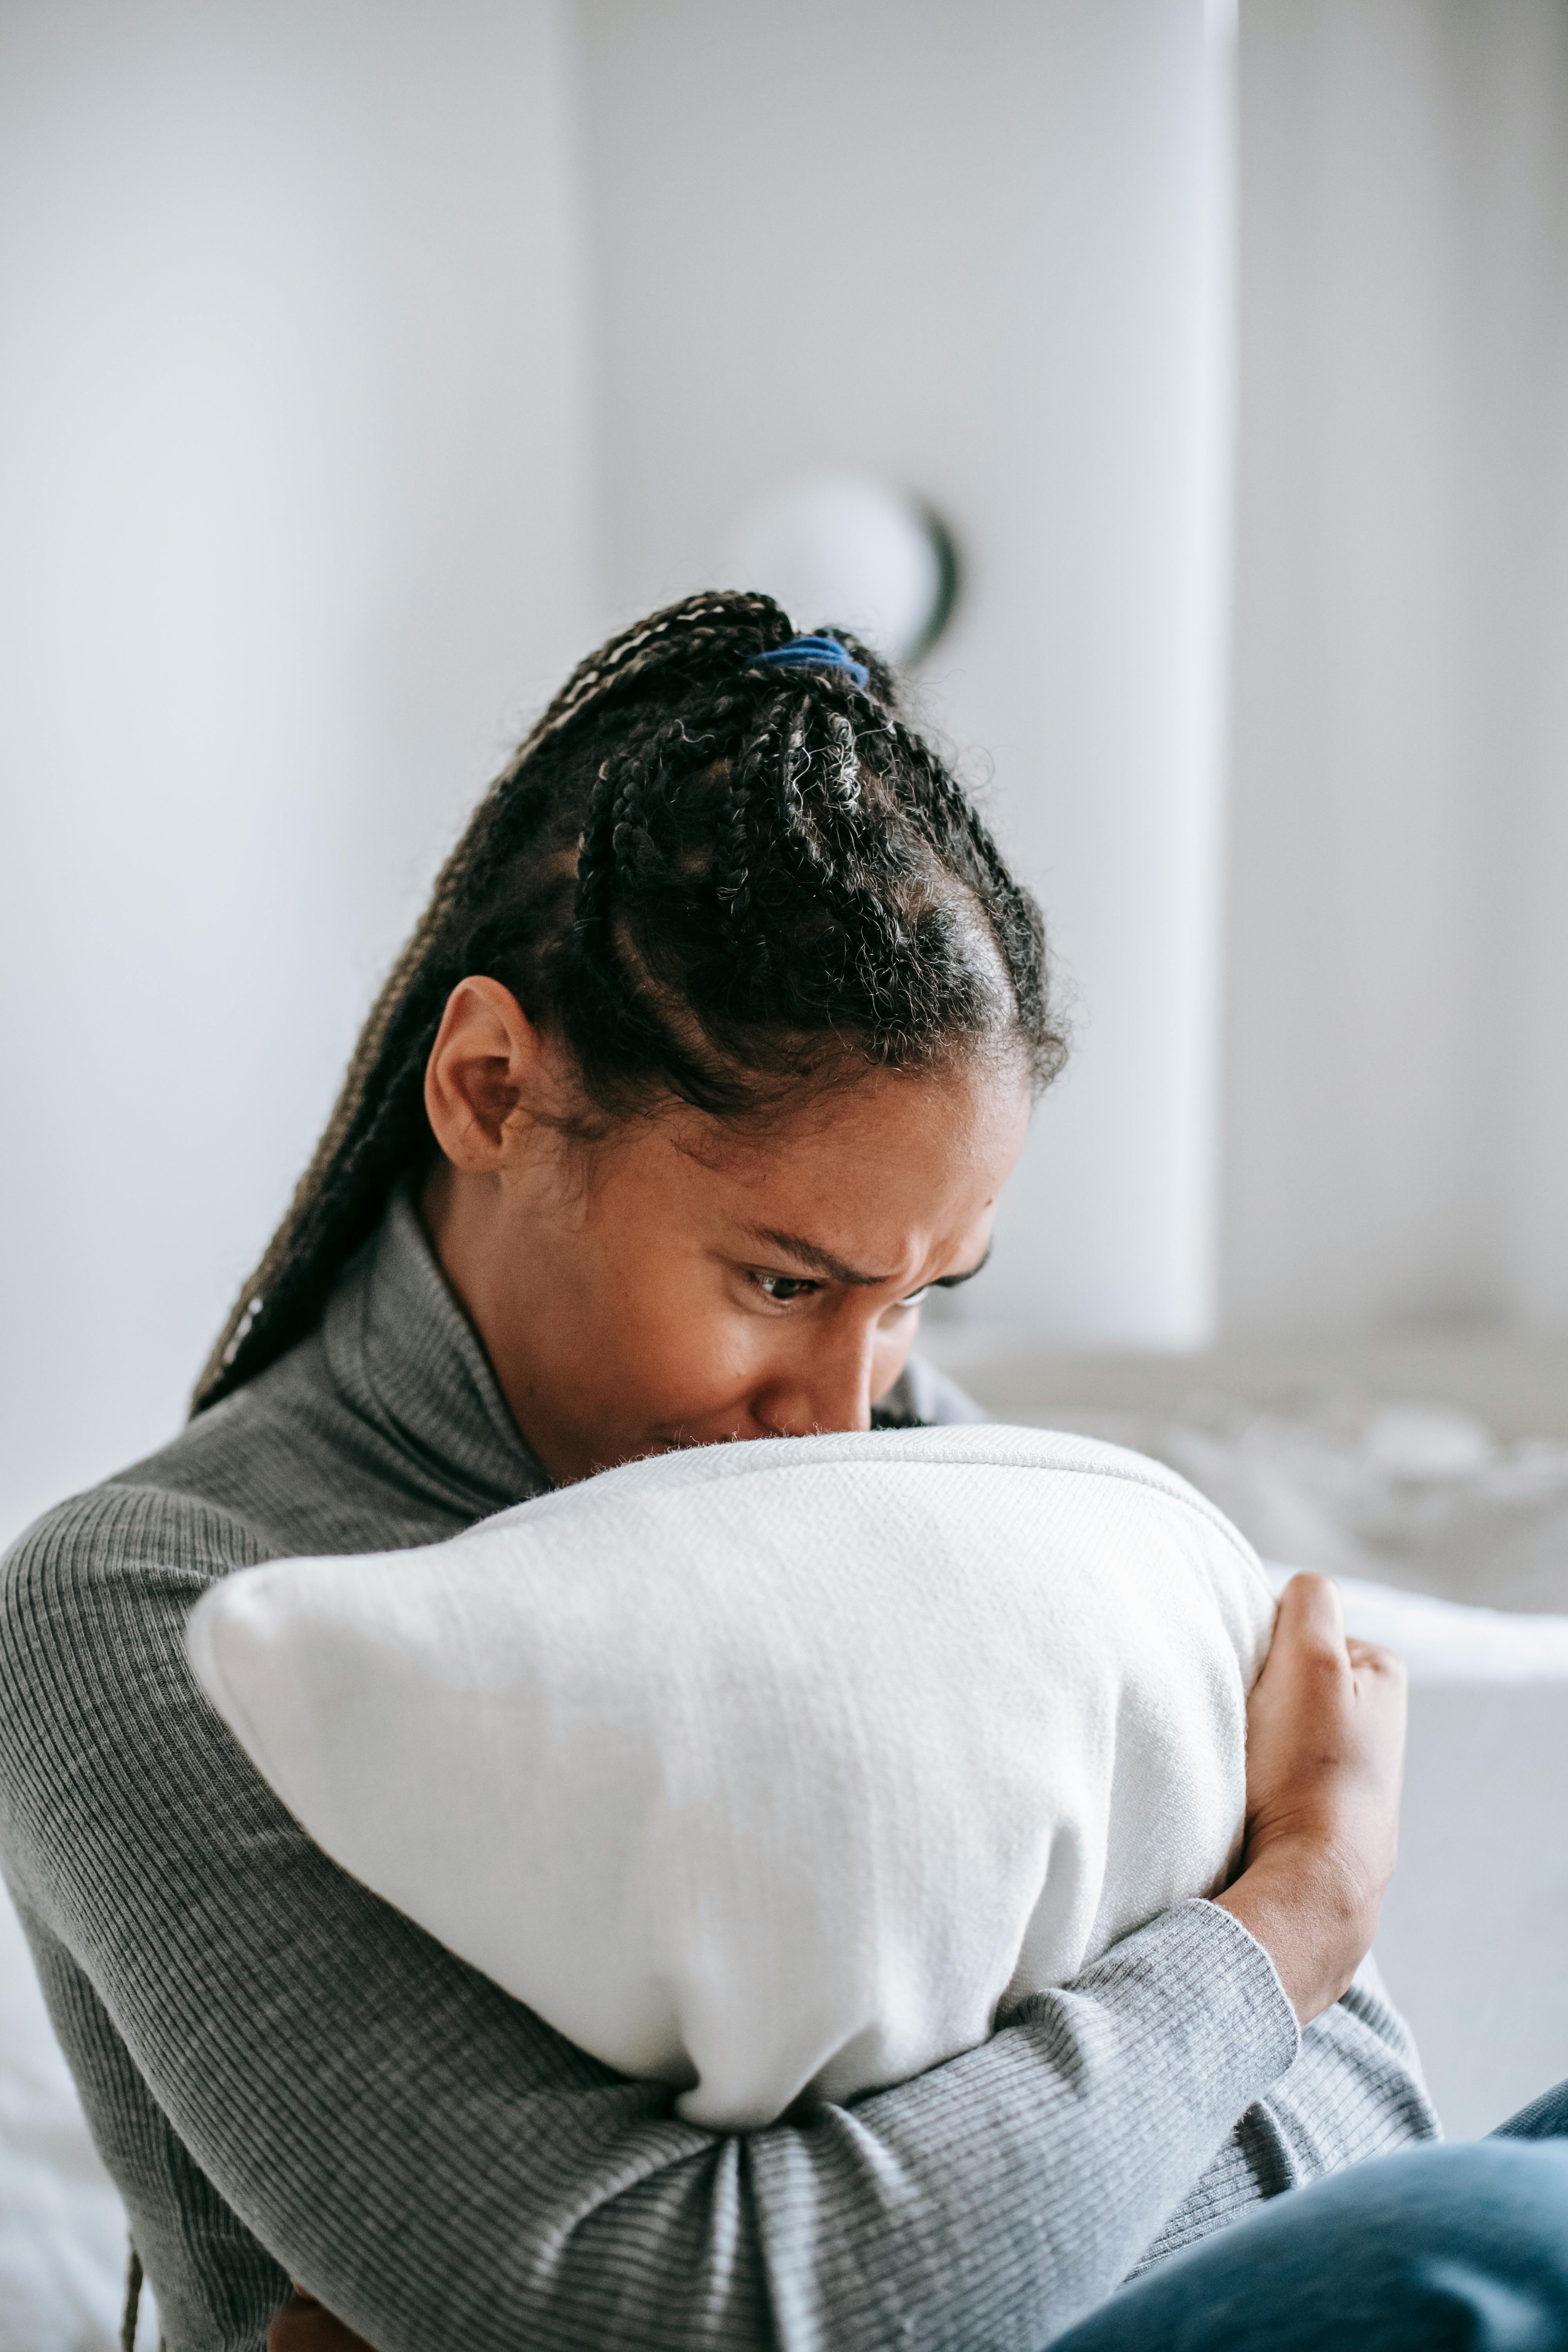 A woman crying into a pillow. For illustration purposes only | Source: Pexels